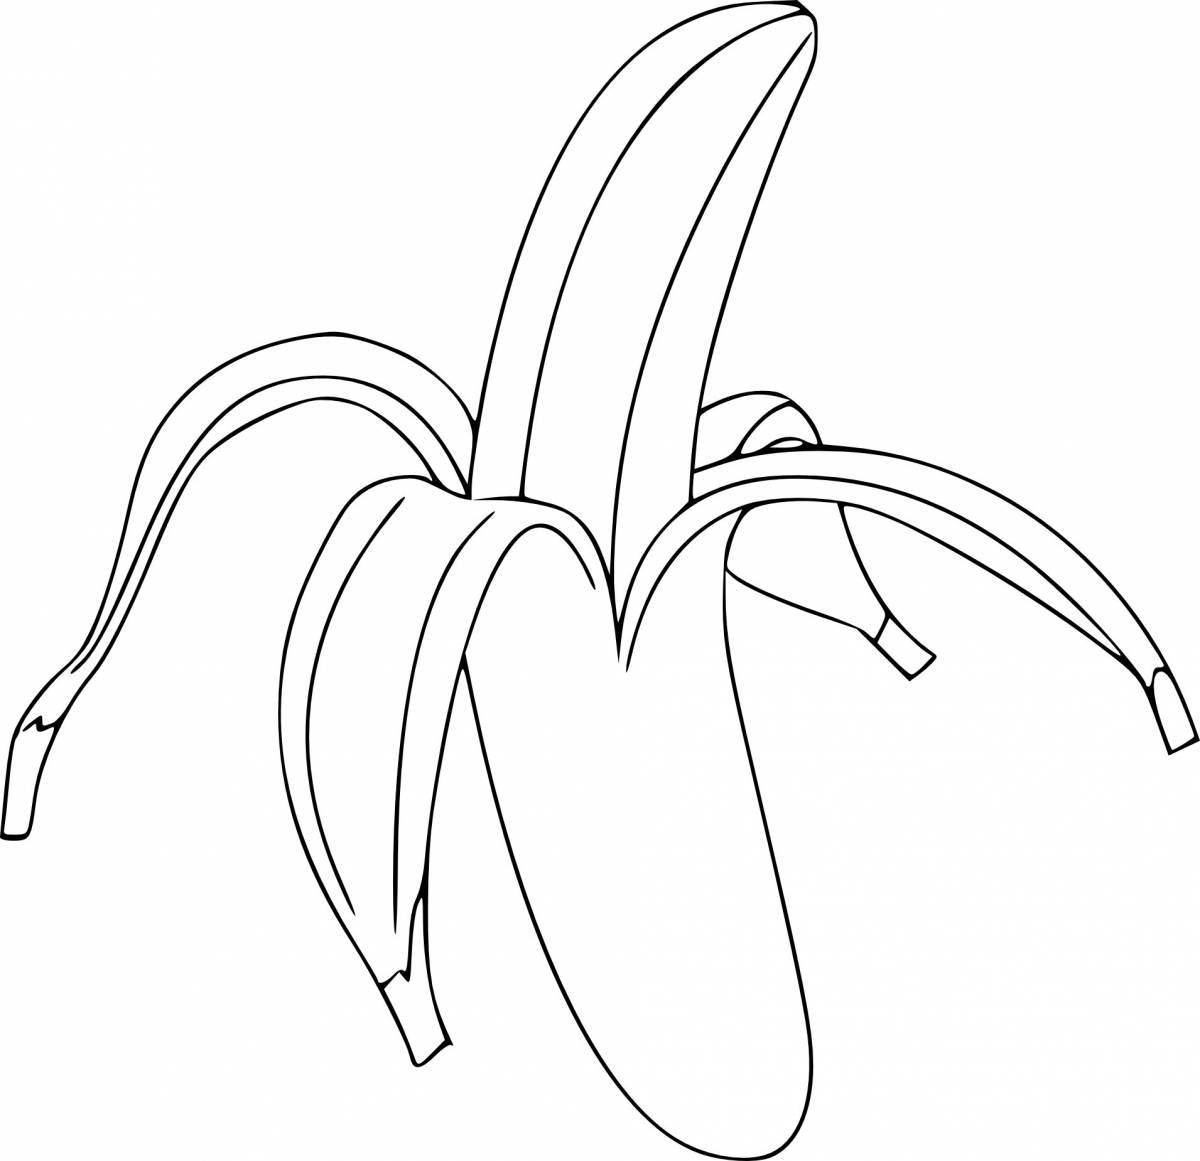 Fun coloring book banana for 3-4 year olds